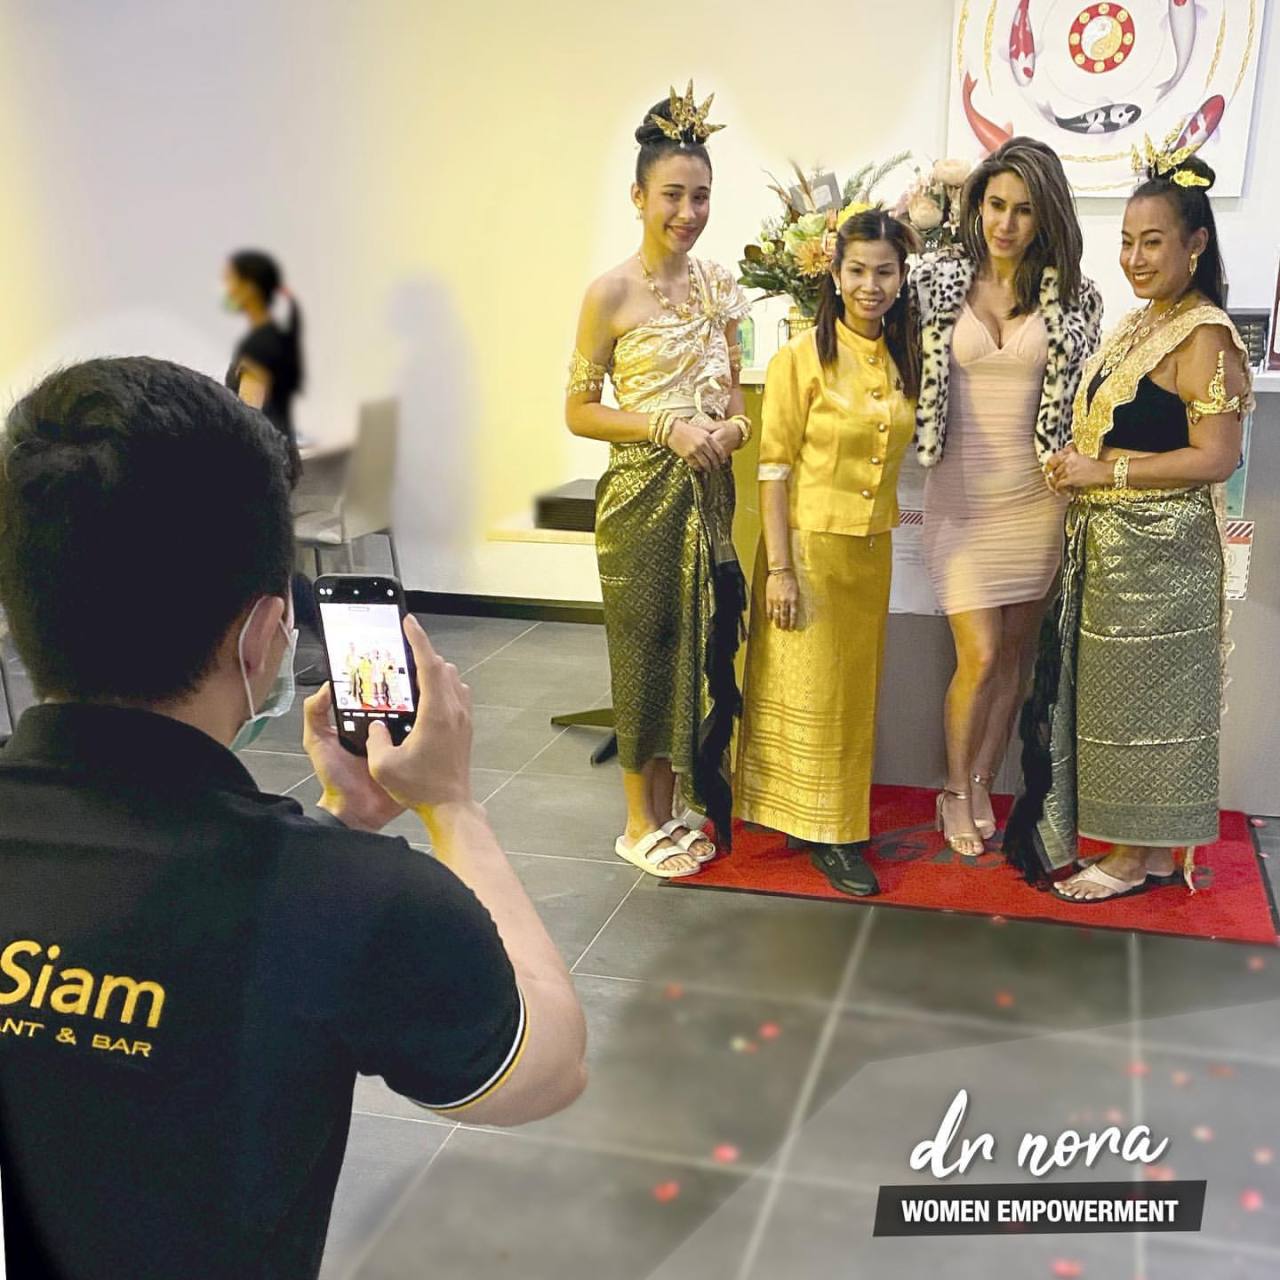 Supporting local female entrepreneurs 💃 It was my pleasure to attend the grand opening of Yum Siam Thai restaurant. The food was exquisite and the traditional live entertainment was beautiful.
A lot of hard work went into opening this waterfront...